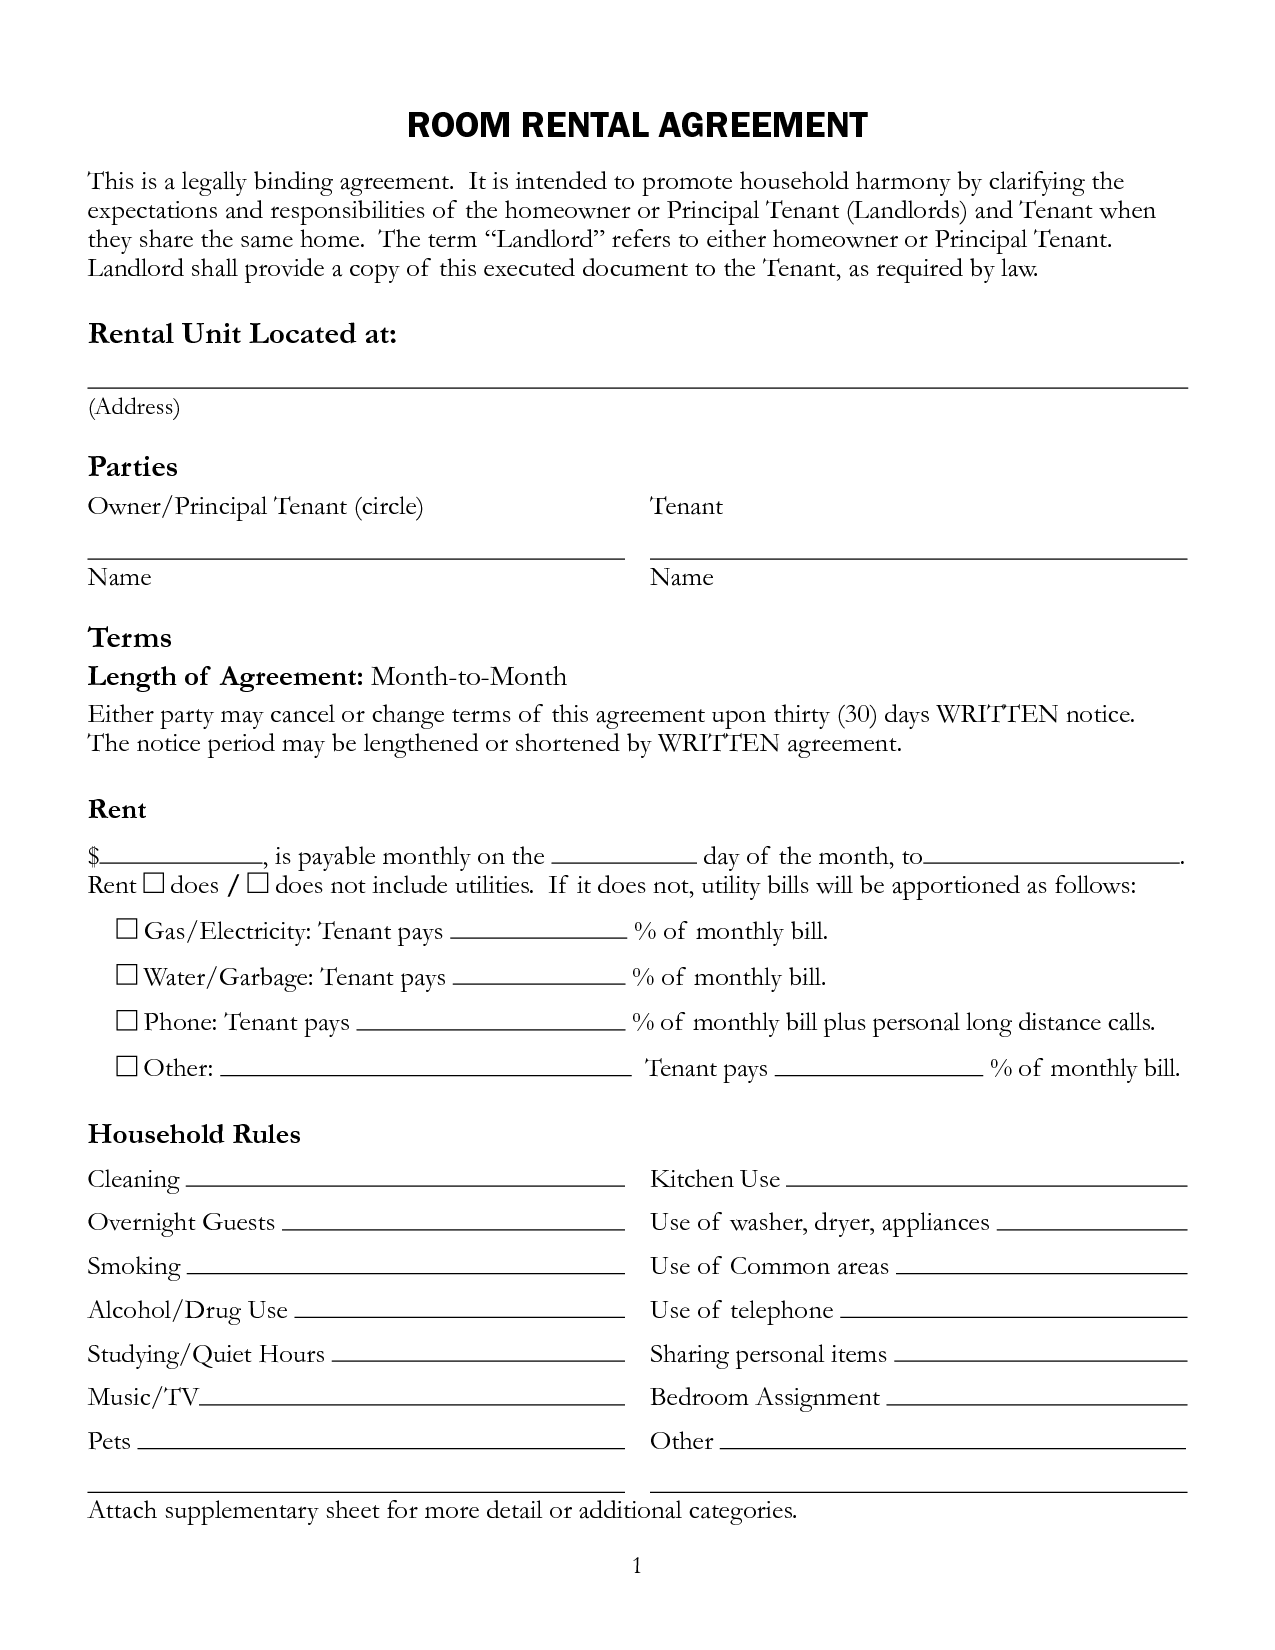 home-renters-agreement-free-printable-documents